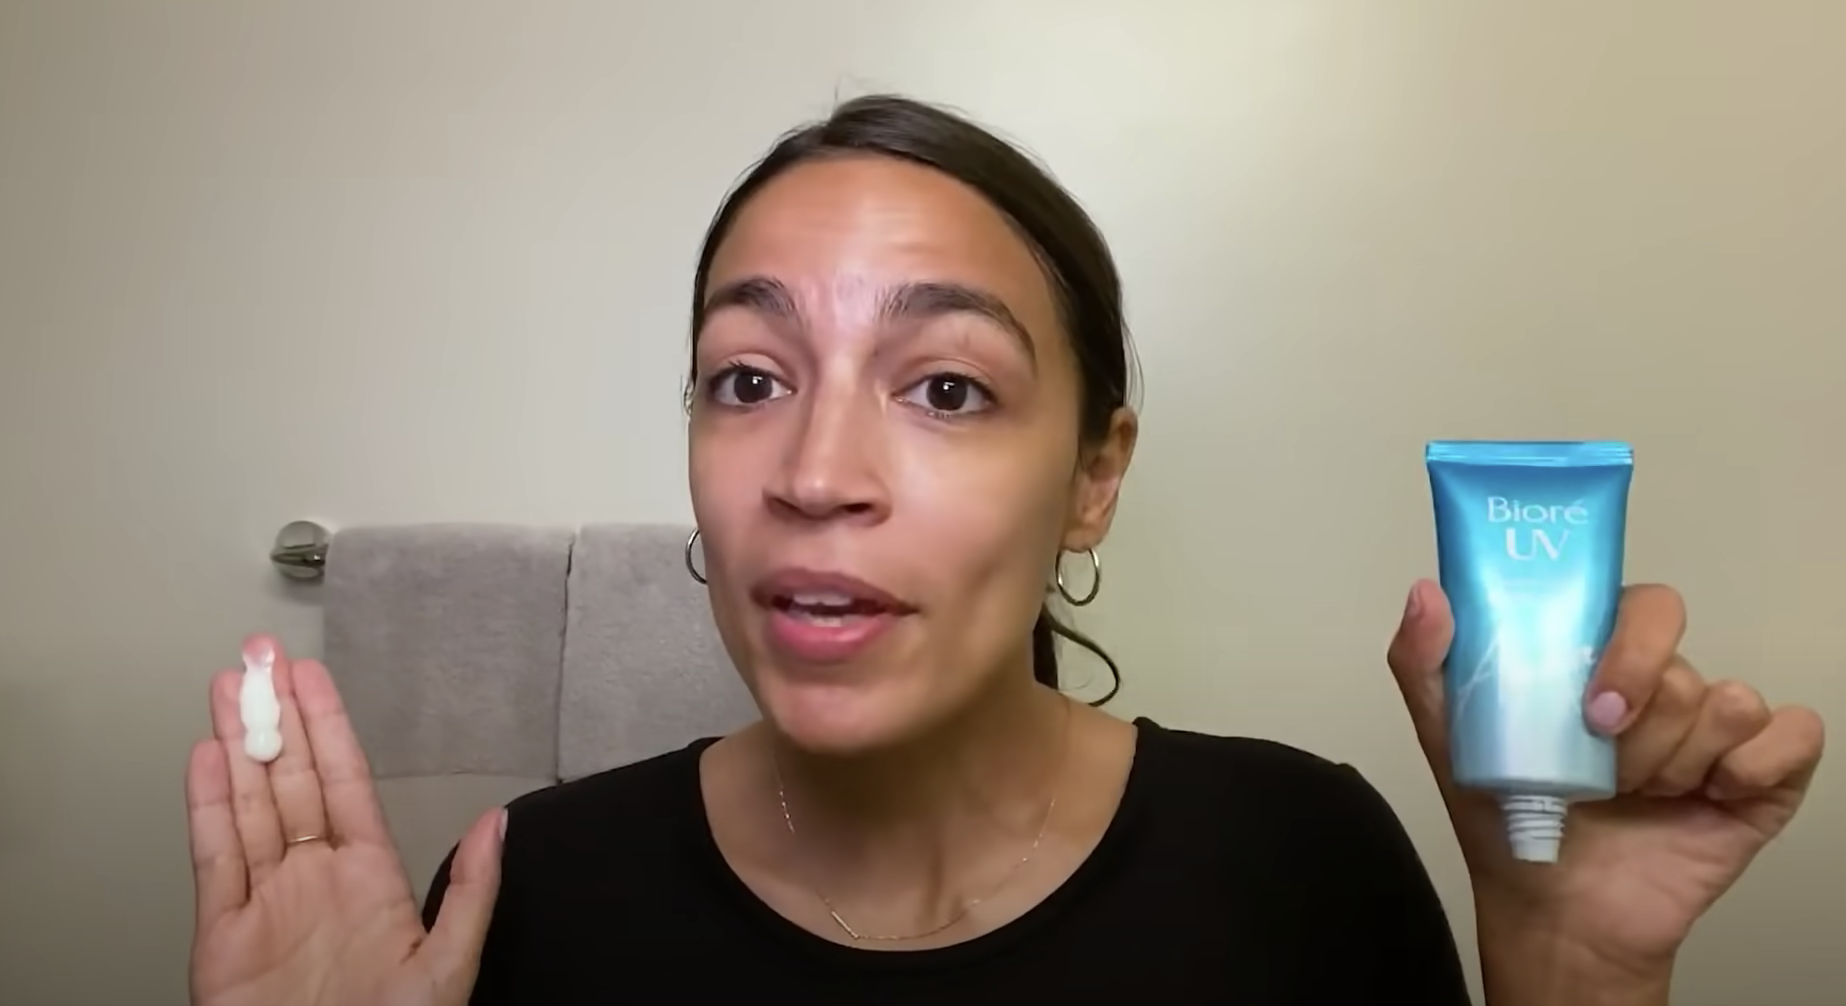 Alexandria Ocasio-Cortez talking to the camera and holding up a tube of sunscreen.